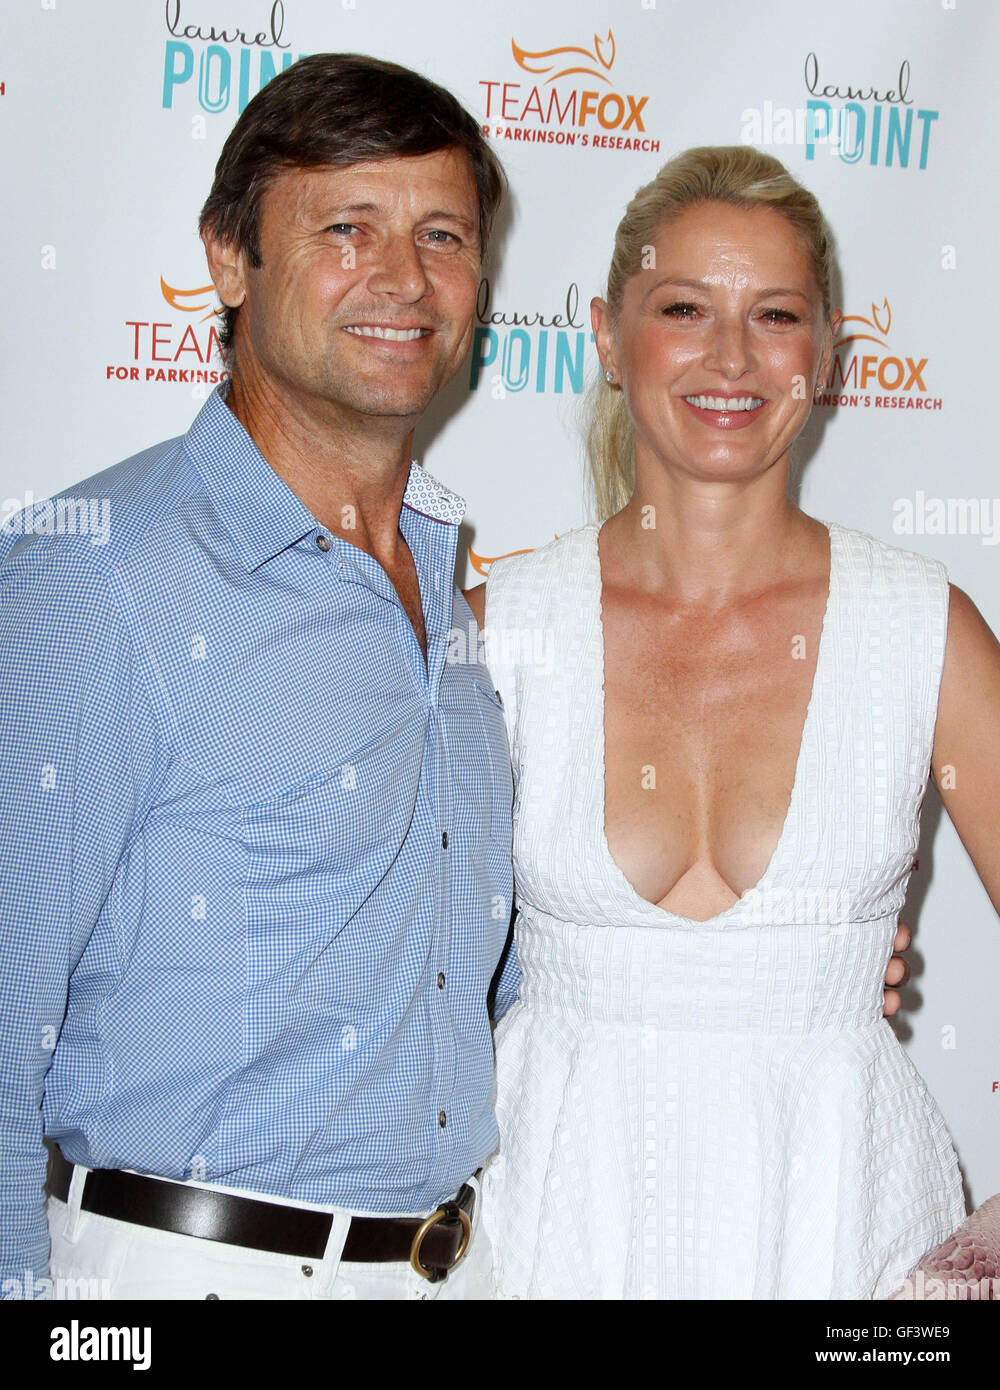 Los Angeles, CA, USA. 27th July, 2016. 27 July 2016 - Los Angeles, California - Grant Show and wife Katherine LaNasa. Raising The Bar To End Parkinson's Fundraiser held at Laurel Point in Studio City. Photo Credit: AdMedia Credit:  AdMedia/ZUMA Wire/Alamy Live News Stock Photo